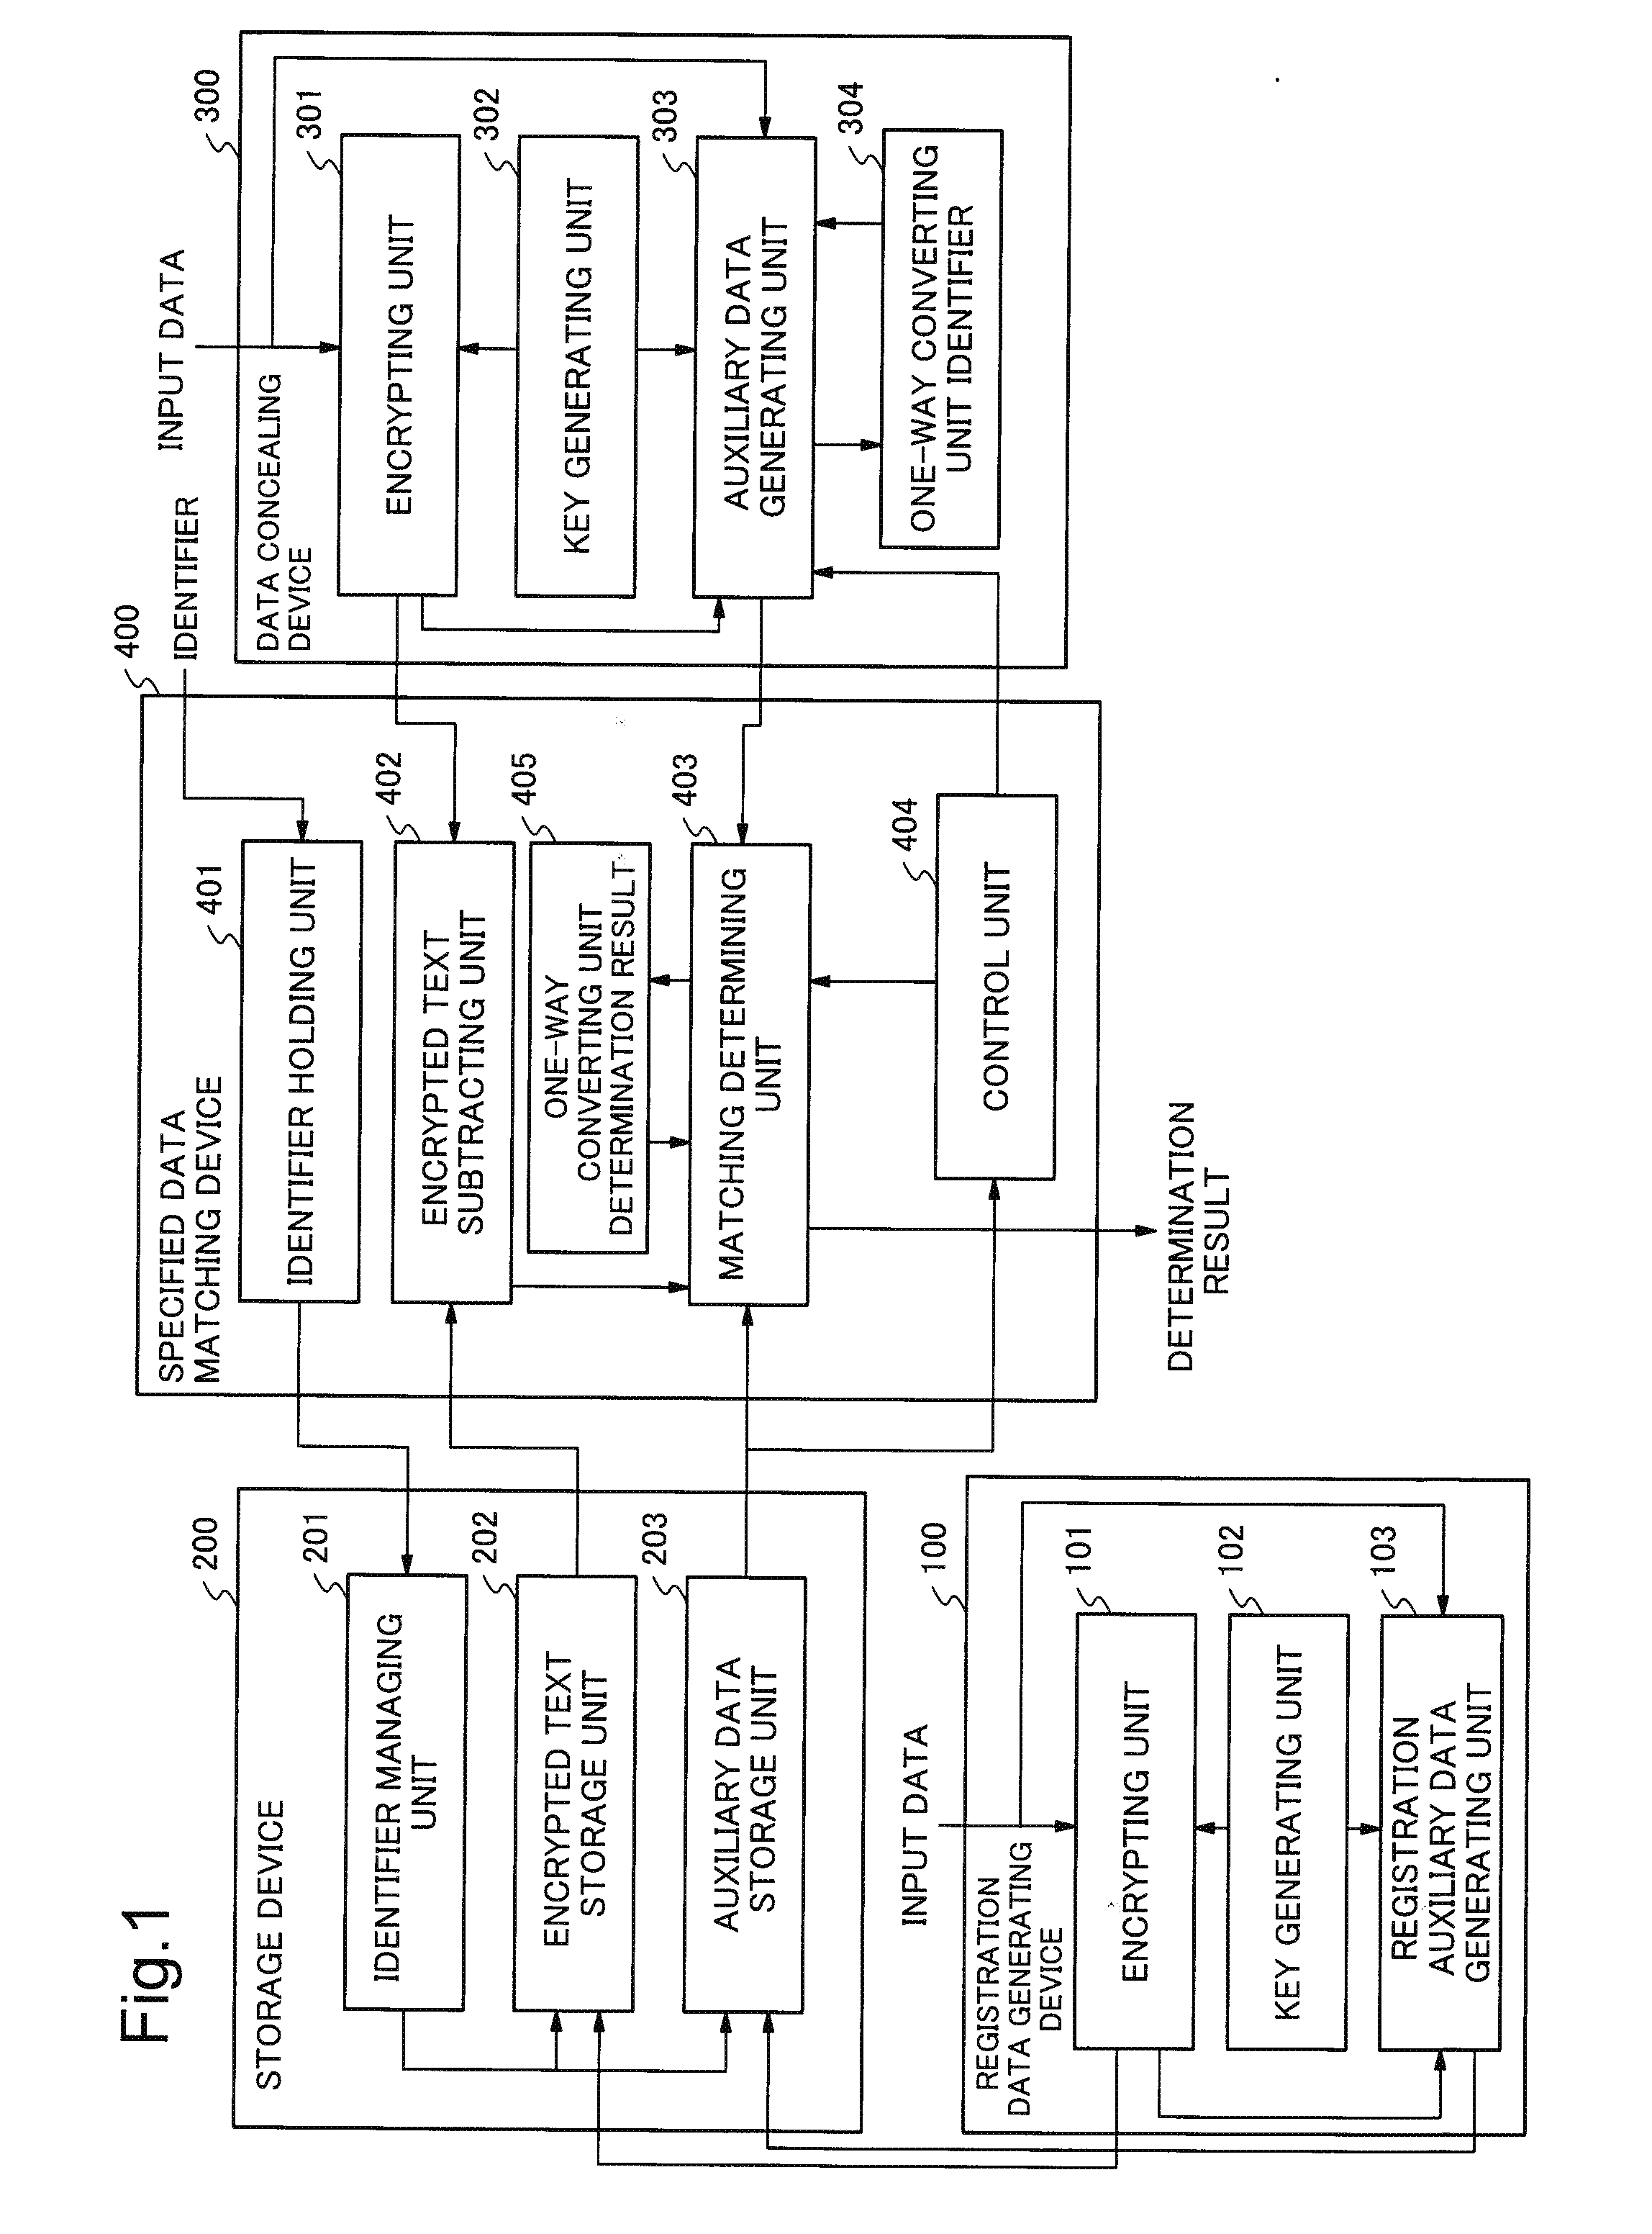 Encrypted text matching system, method, and computer readable medium